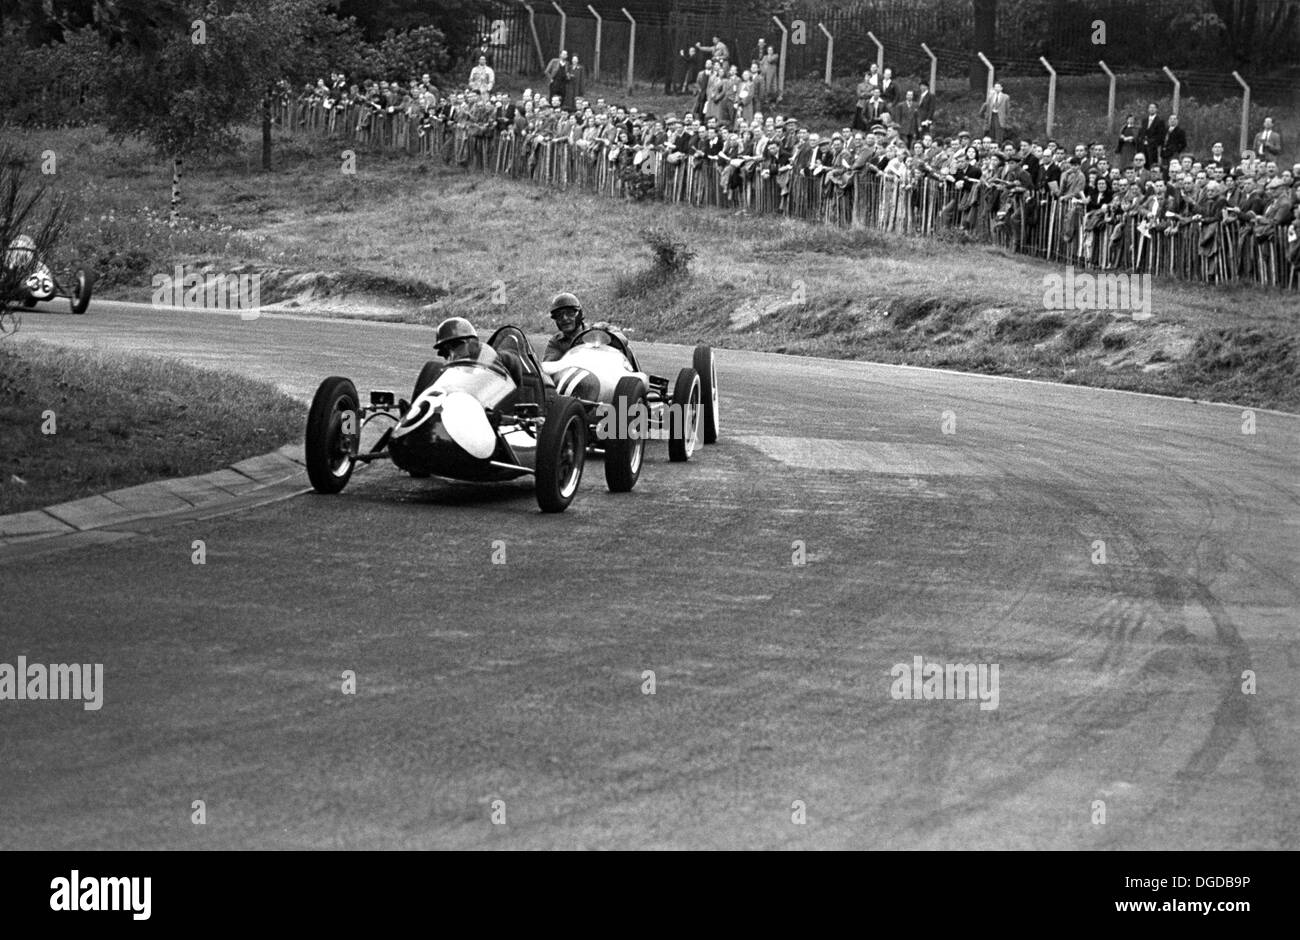 Les Leston, a jazz drummer, racing in a 500cc Formula 3 race, Crystal Palace, England, 19th September 1953. Stock Photo